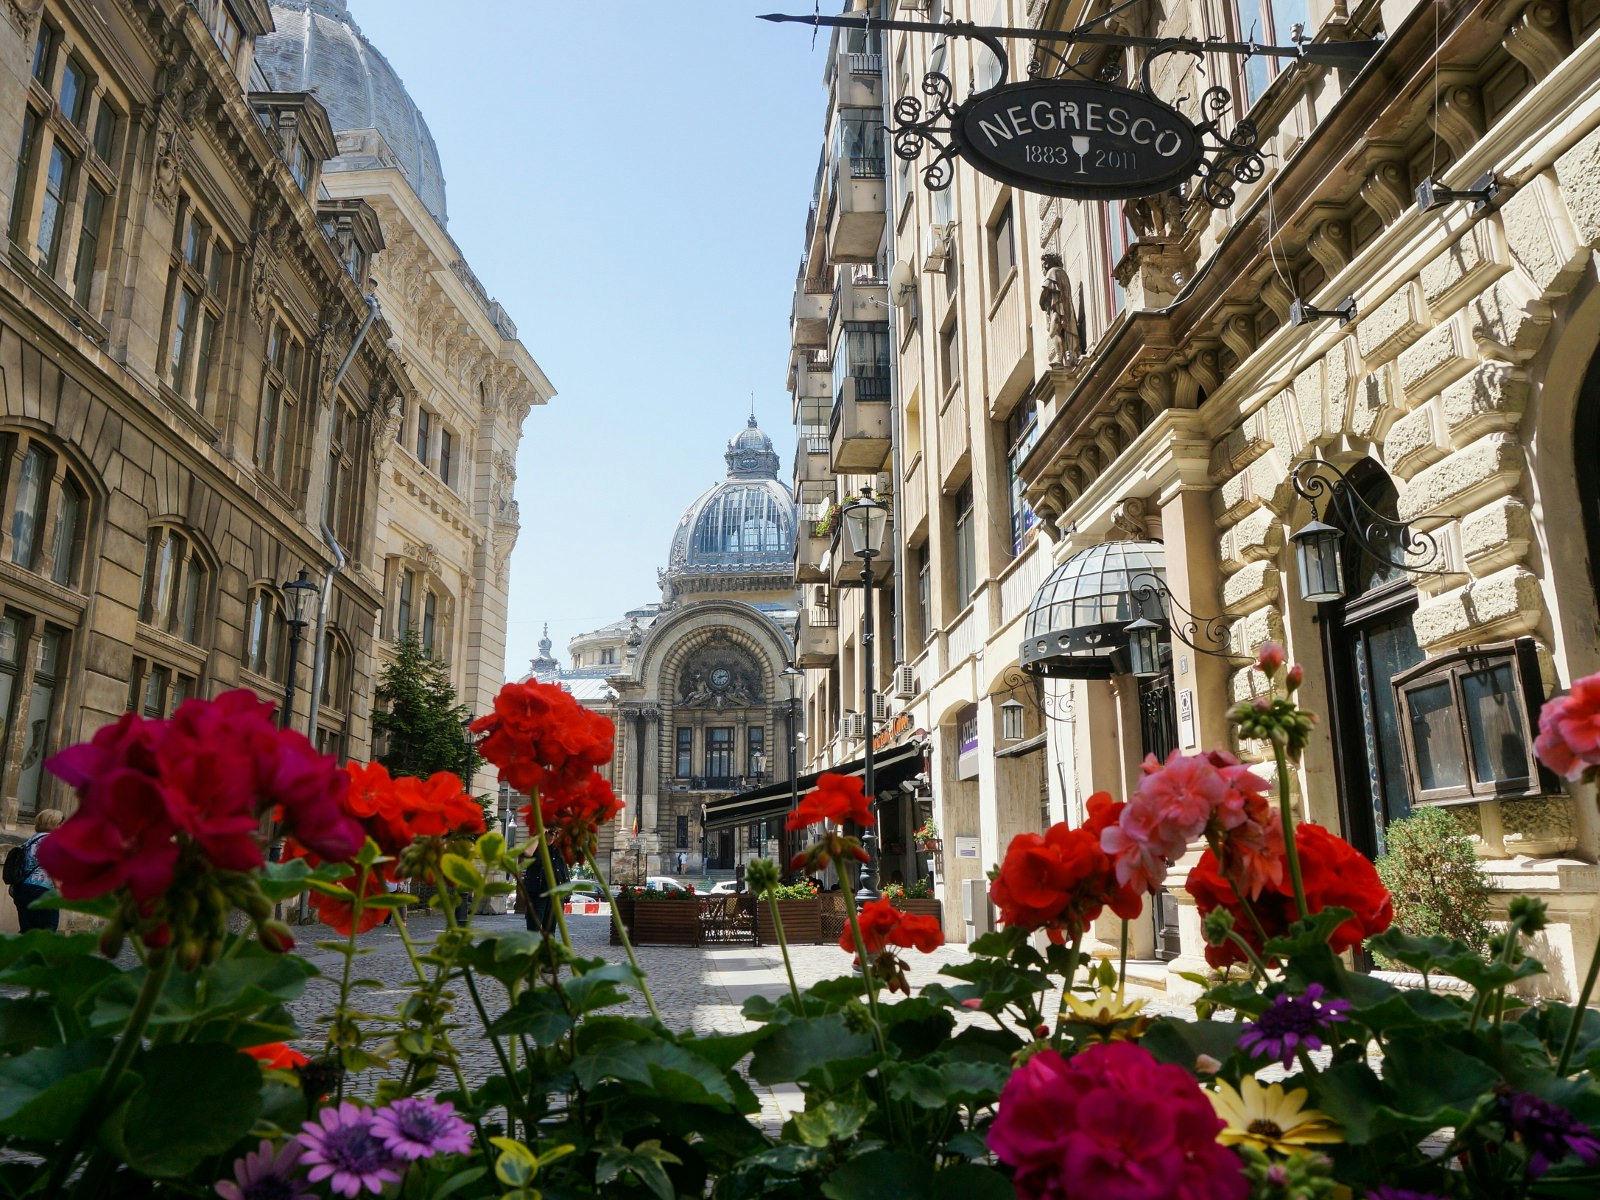 Some of Bucharest's architectural highlights are found in the Old Town © Monica Suma / Lonely Planet